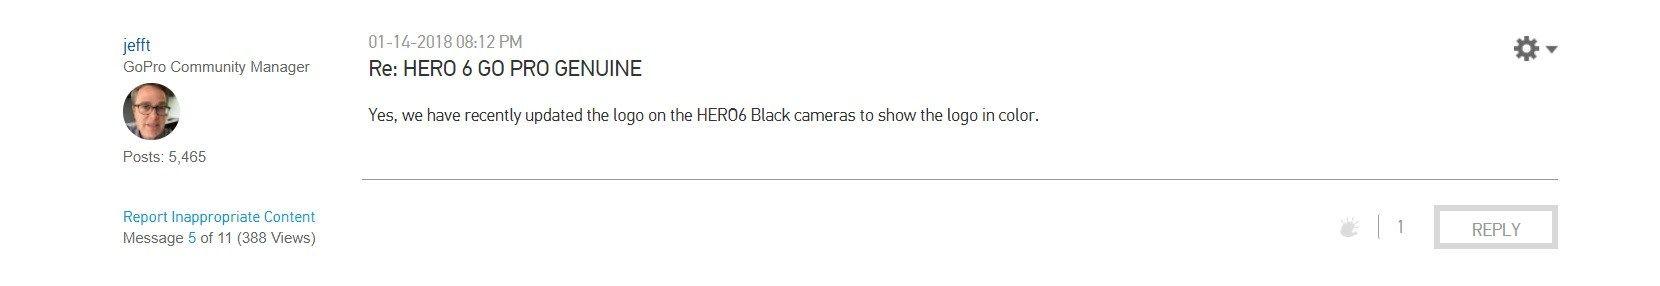 Grey Colored Logo - GoPro HERO6 Colored and Gray Logo's the Difference?